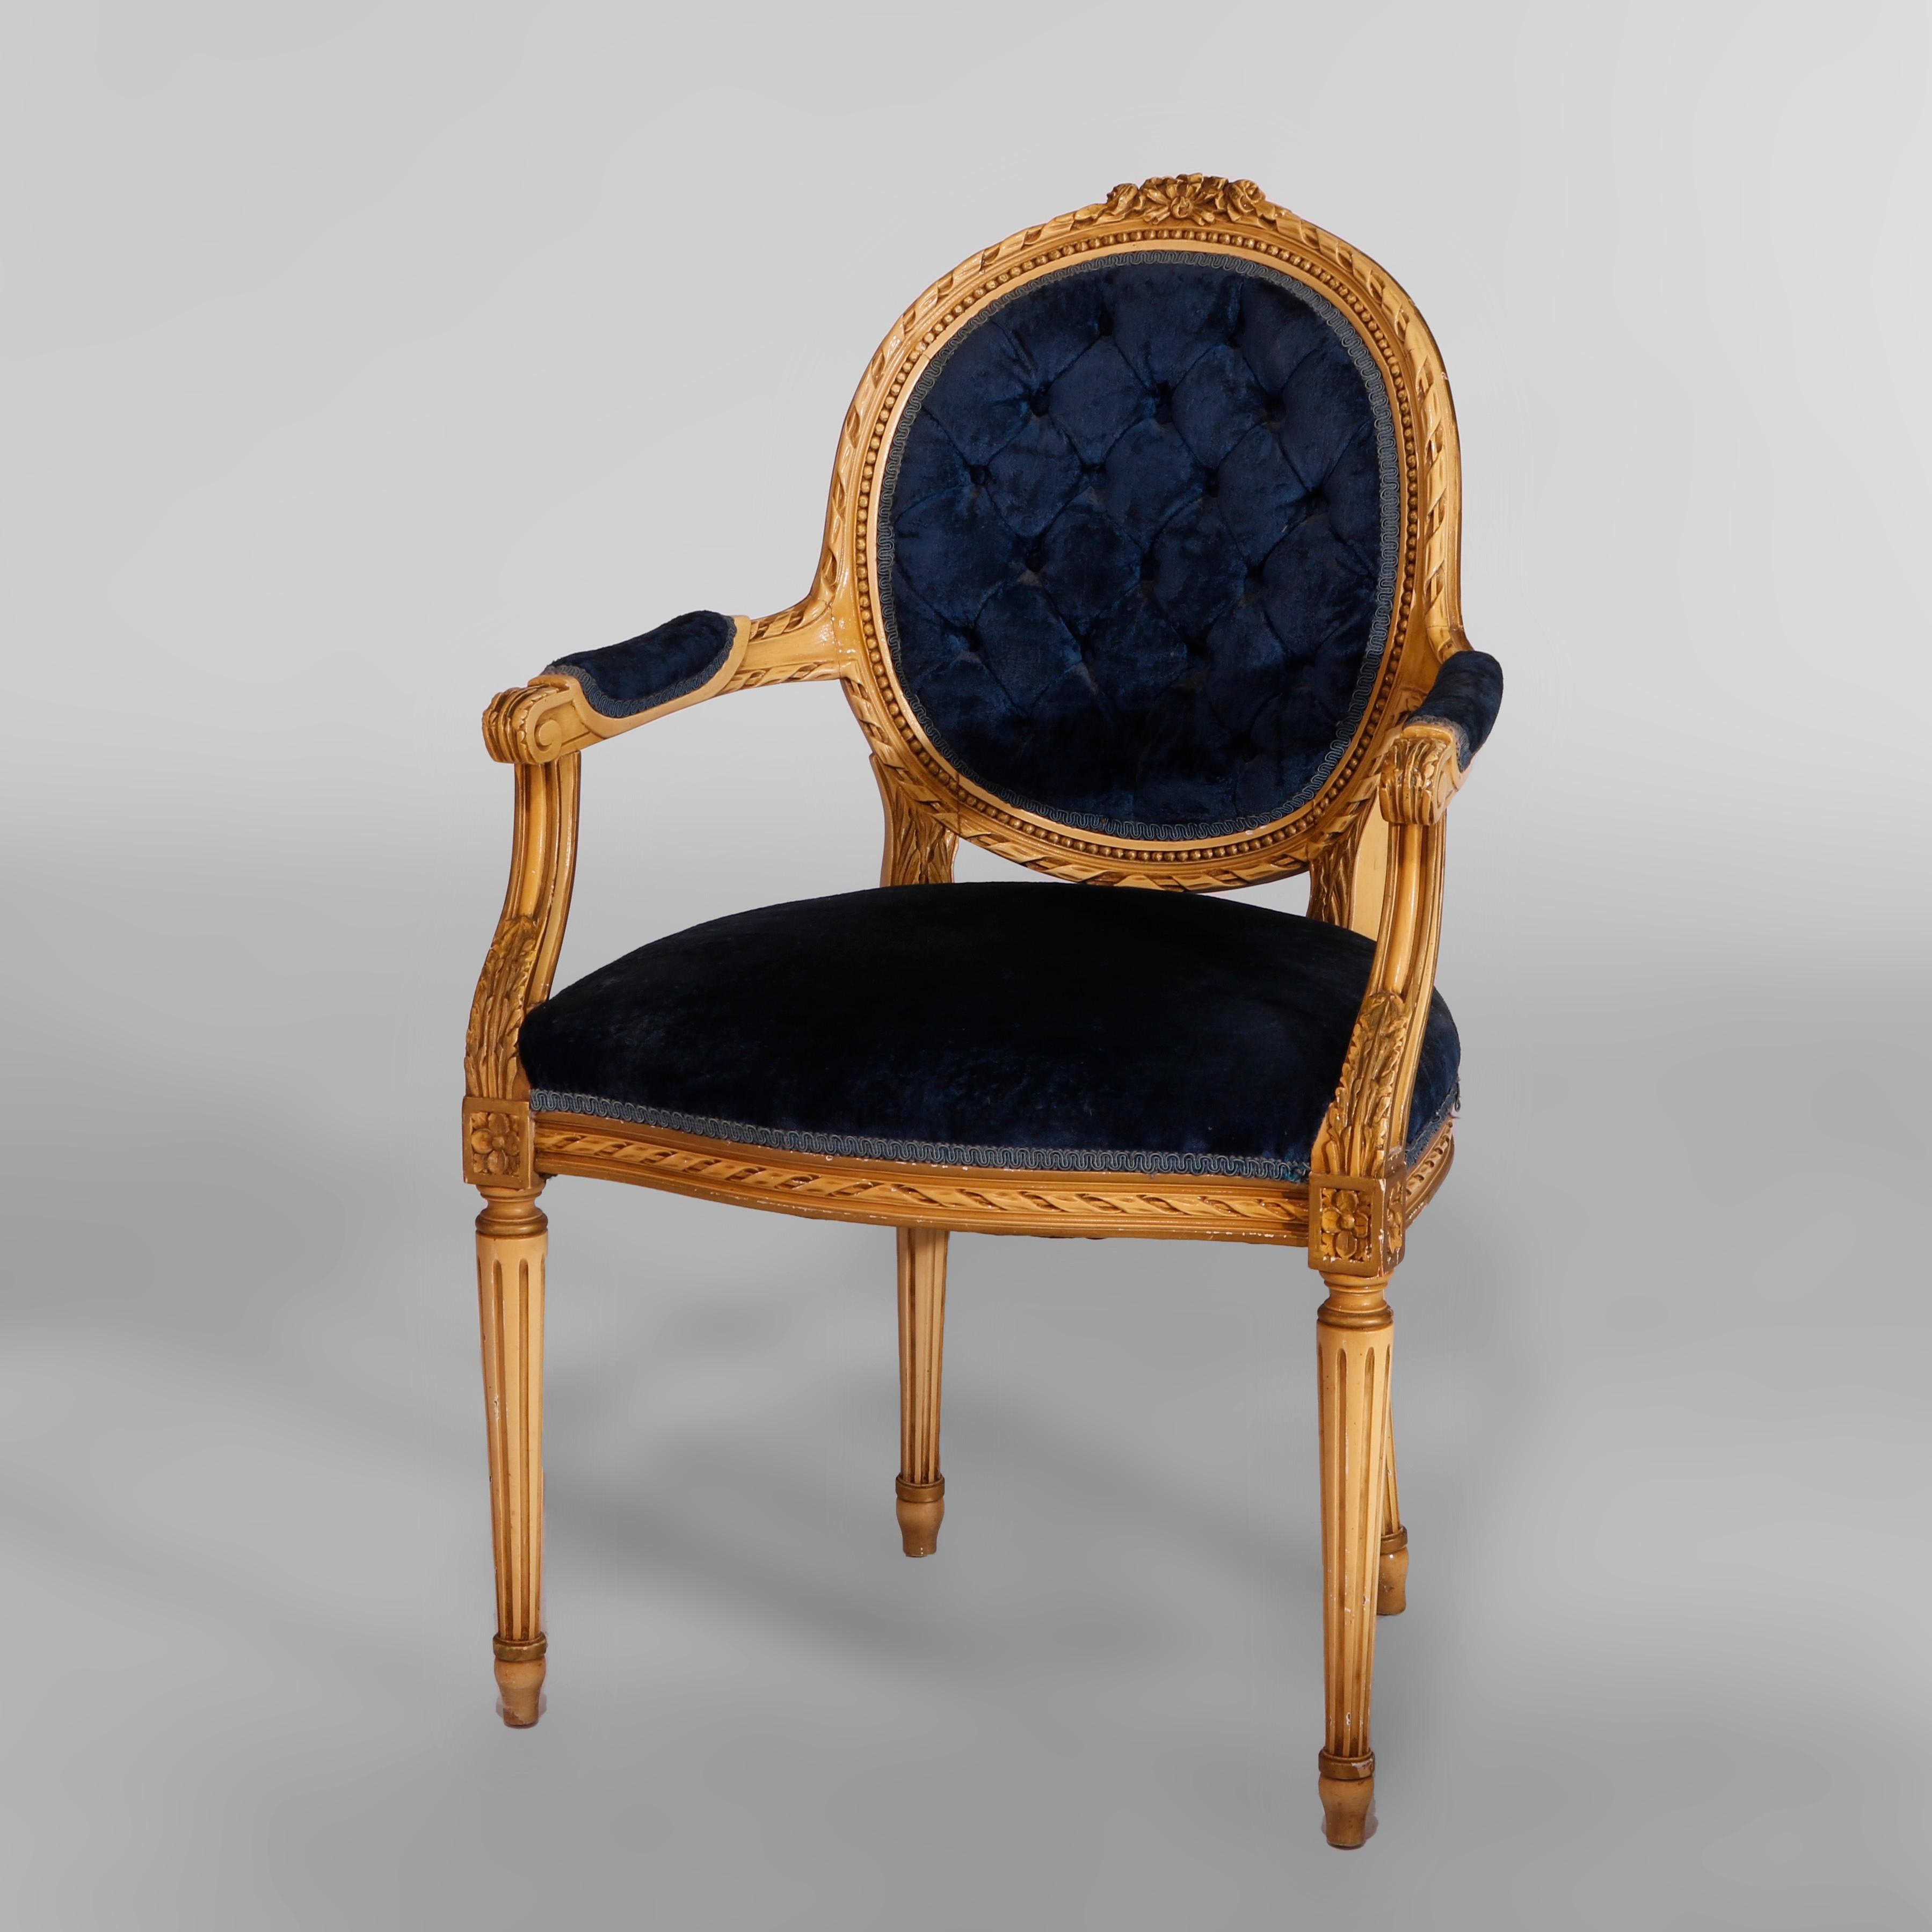 20th Century Antique French Louis XVI Style Upholstered Armchair, circa 1930